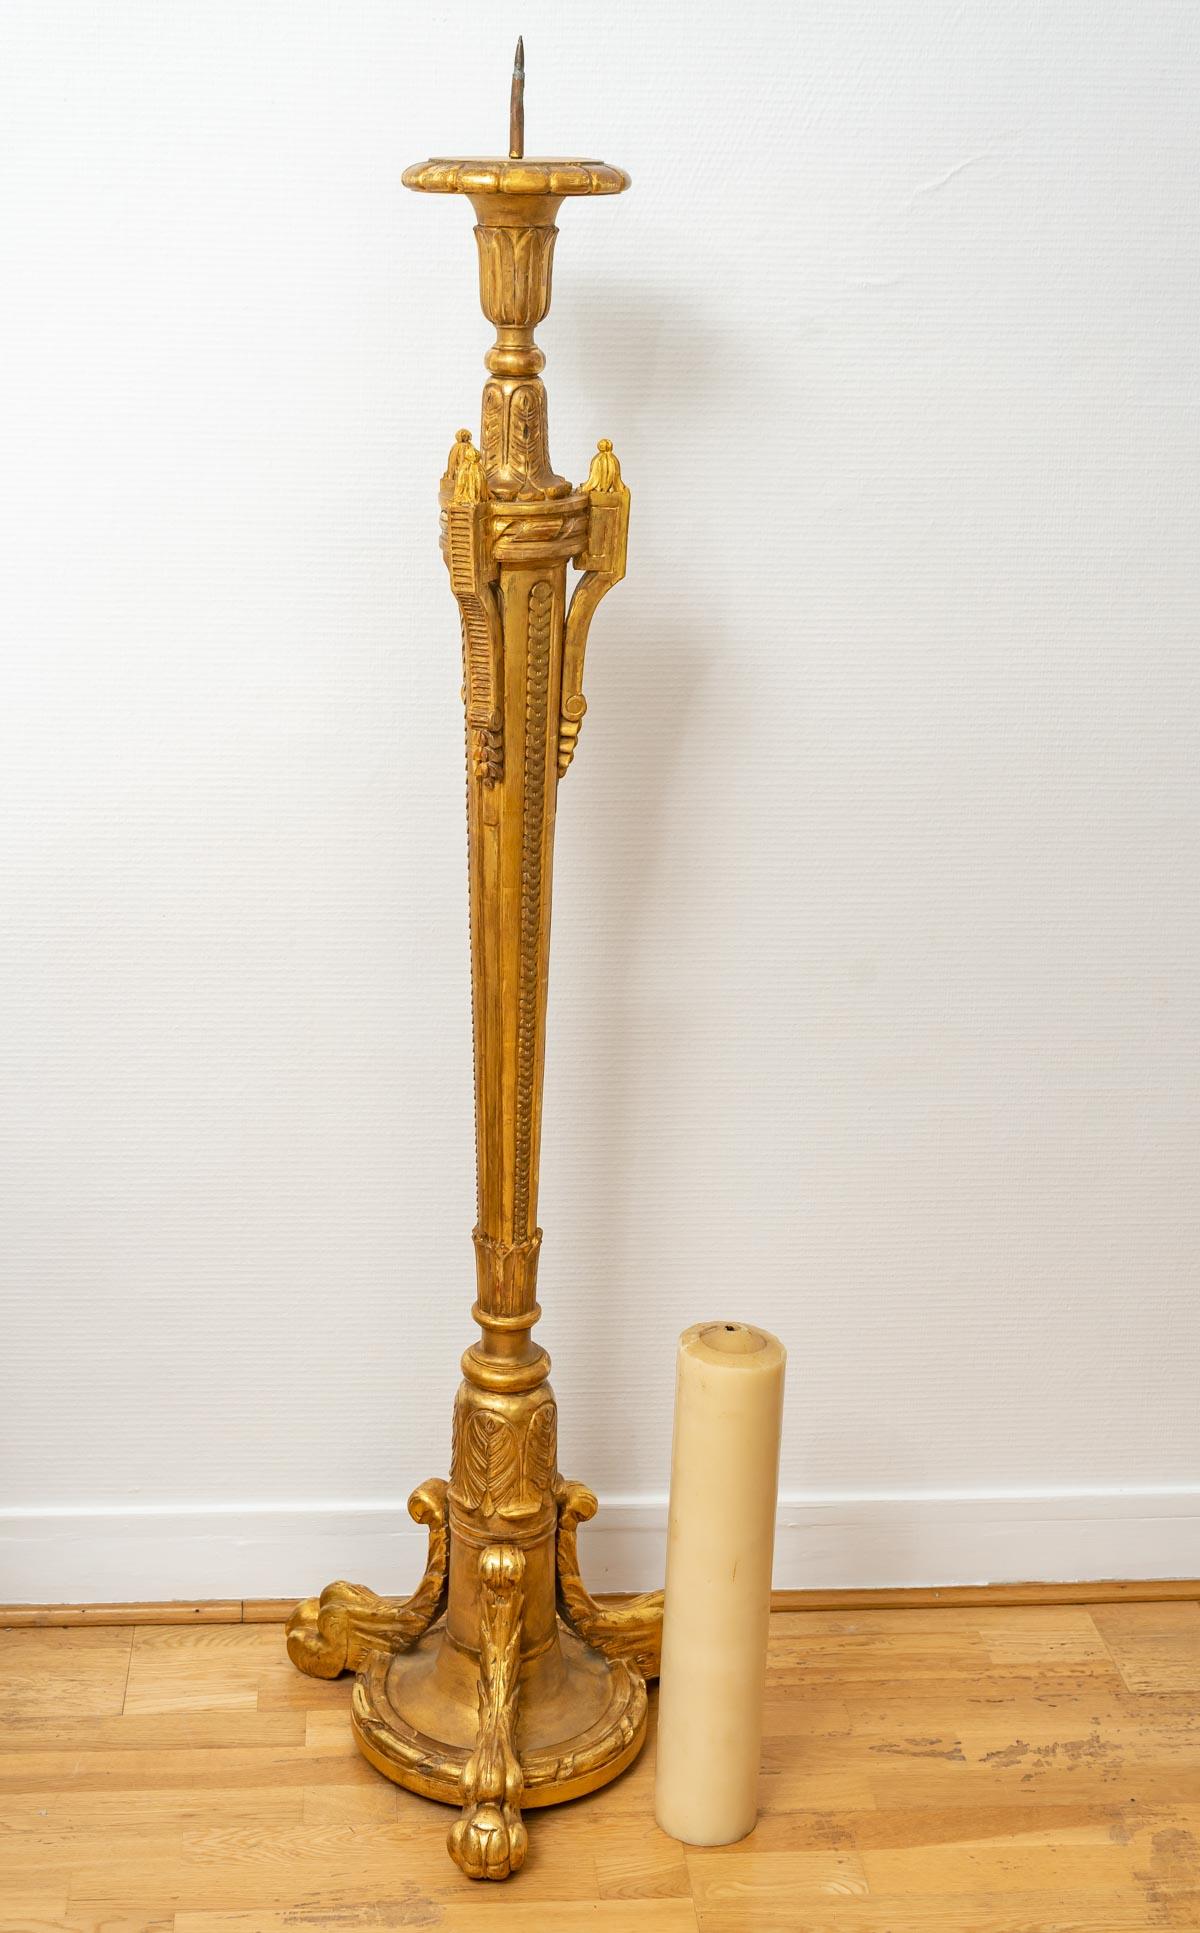 Louis XIII Large Pic Candle Or Verge Candlestick - Golden Wood With Leaf - Period: XIXth  For Sale